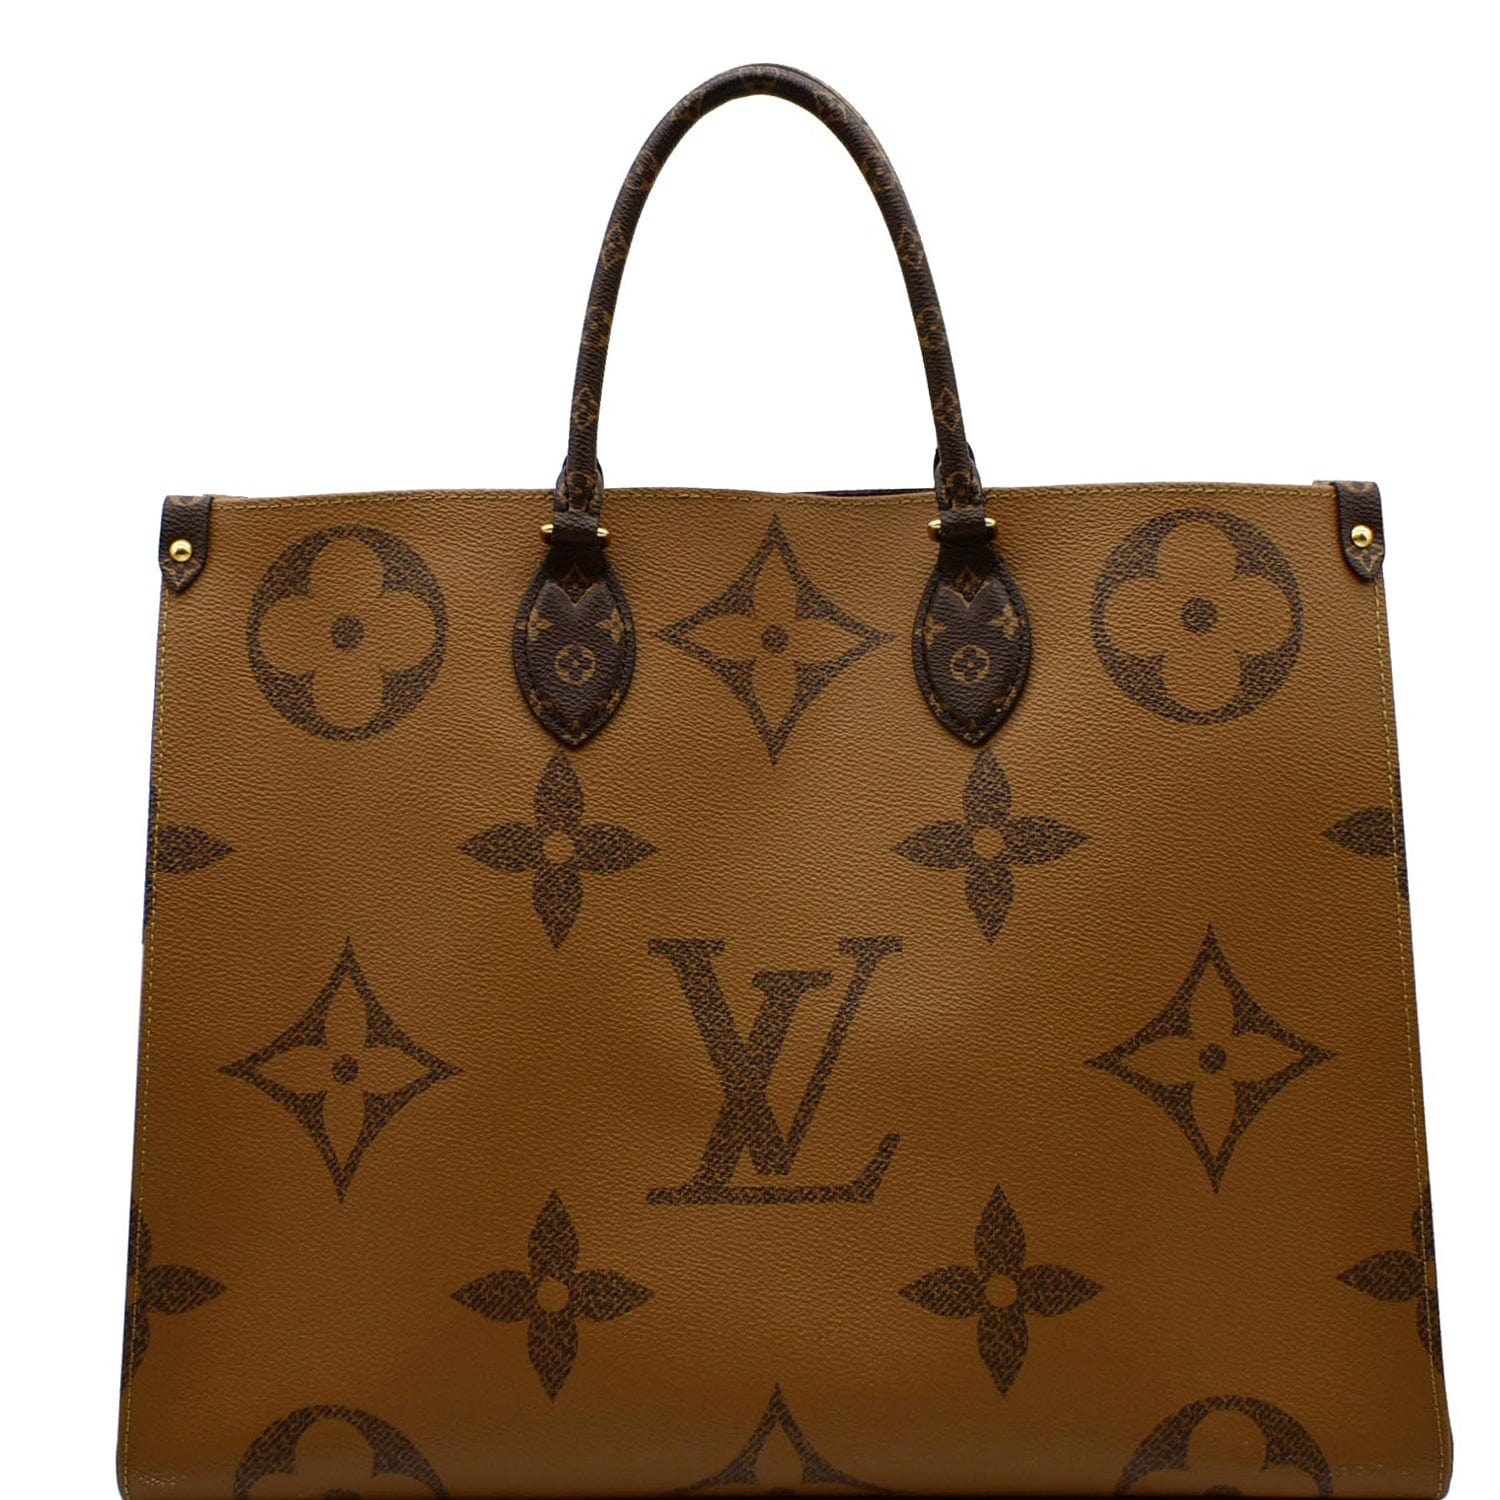 Both big bags but the Louis Vuitton Artsy GM is huge